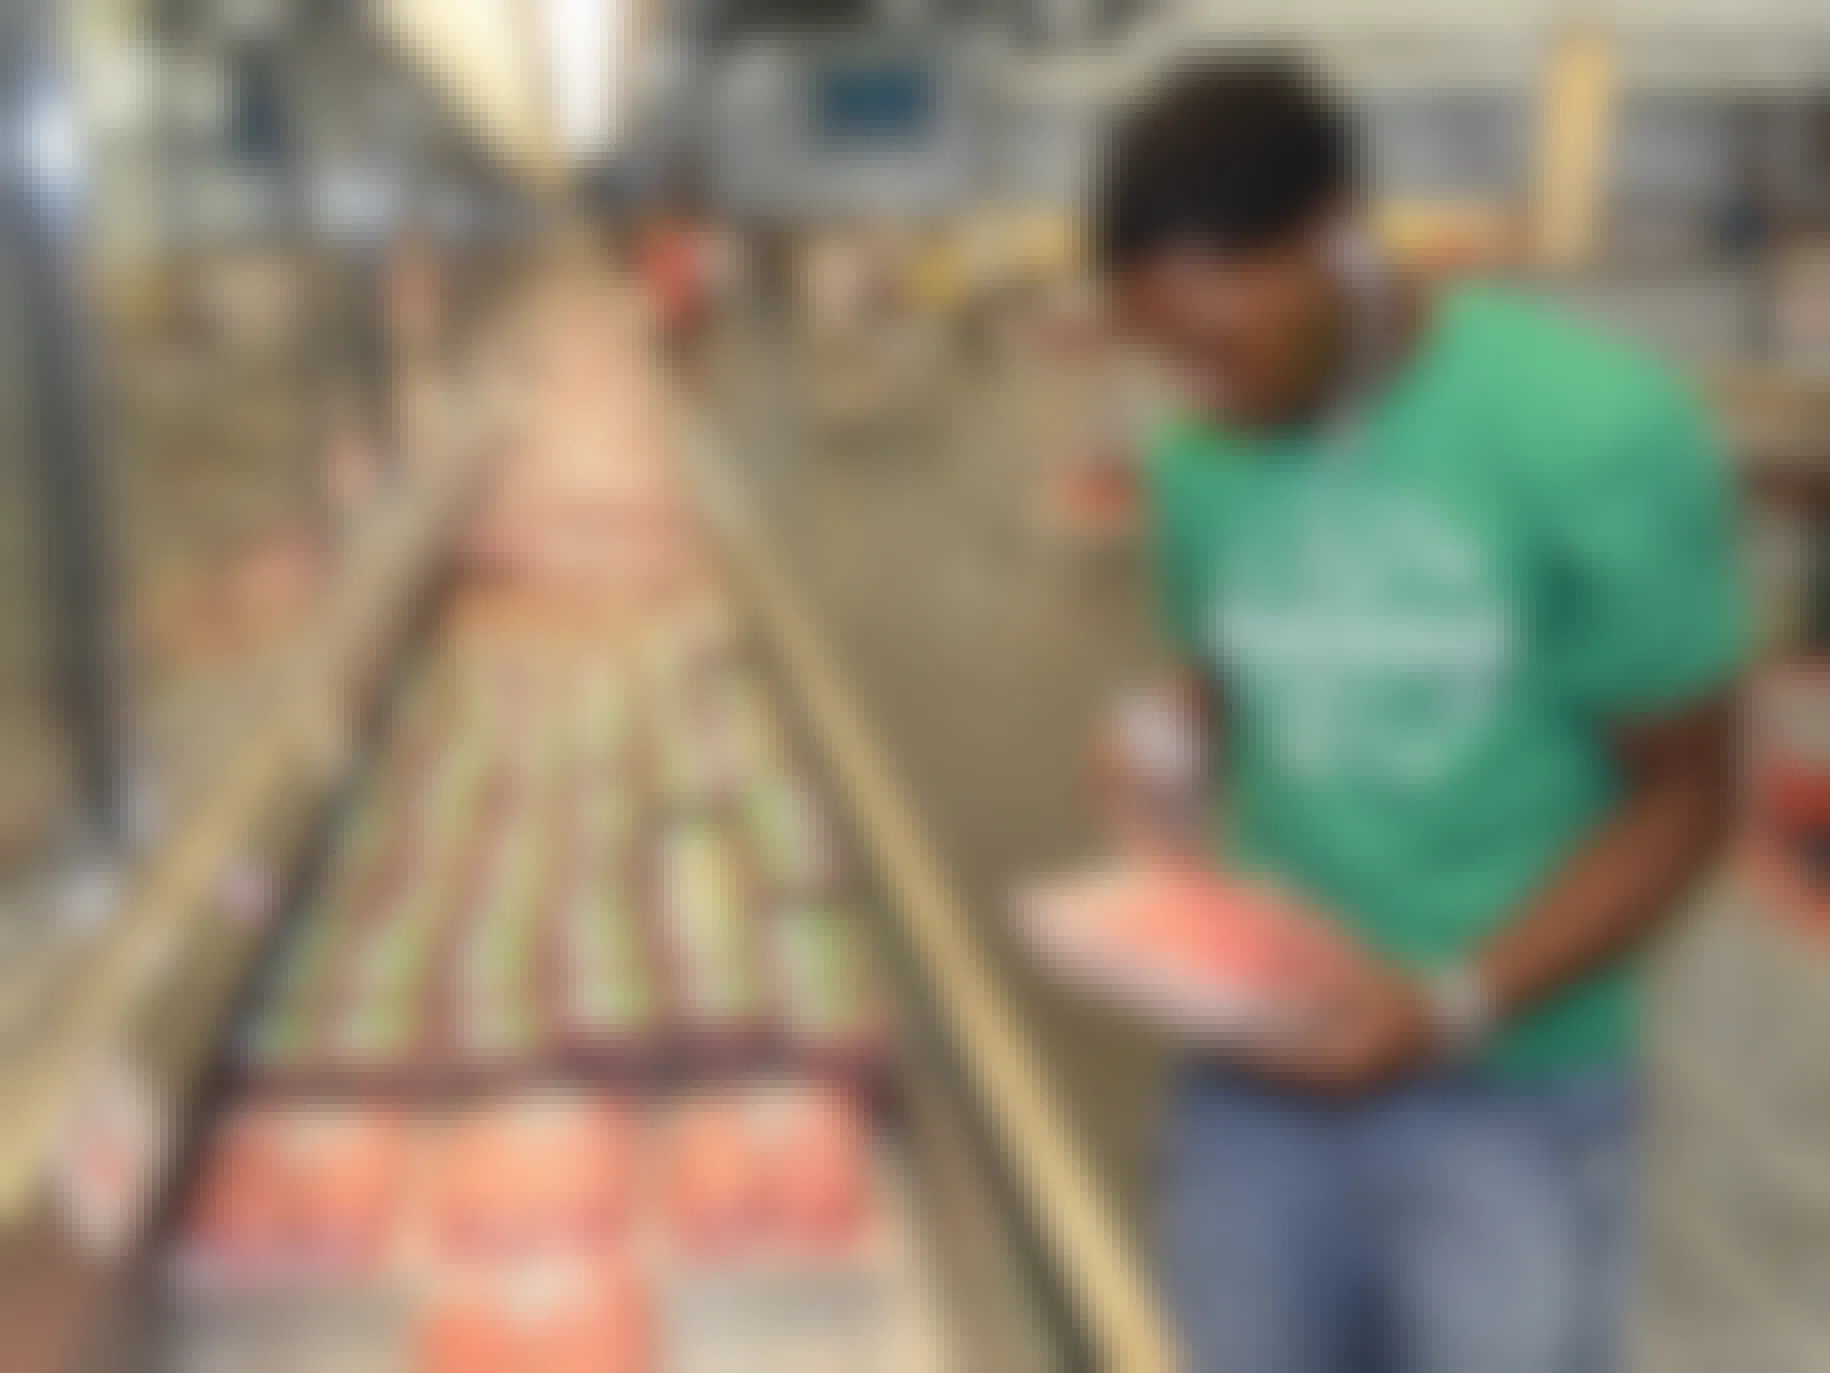 Amazon, Whole Foods and Instacart Employees Walkout: Now What?